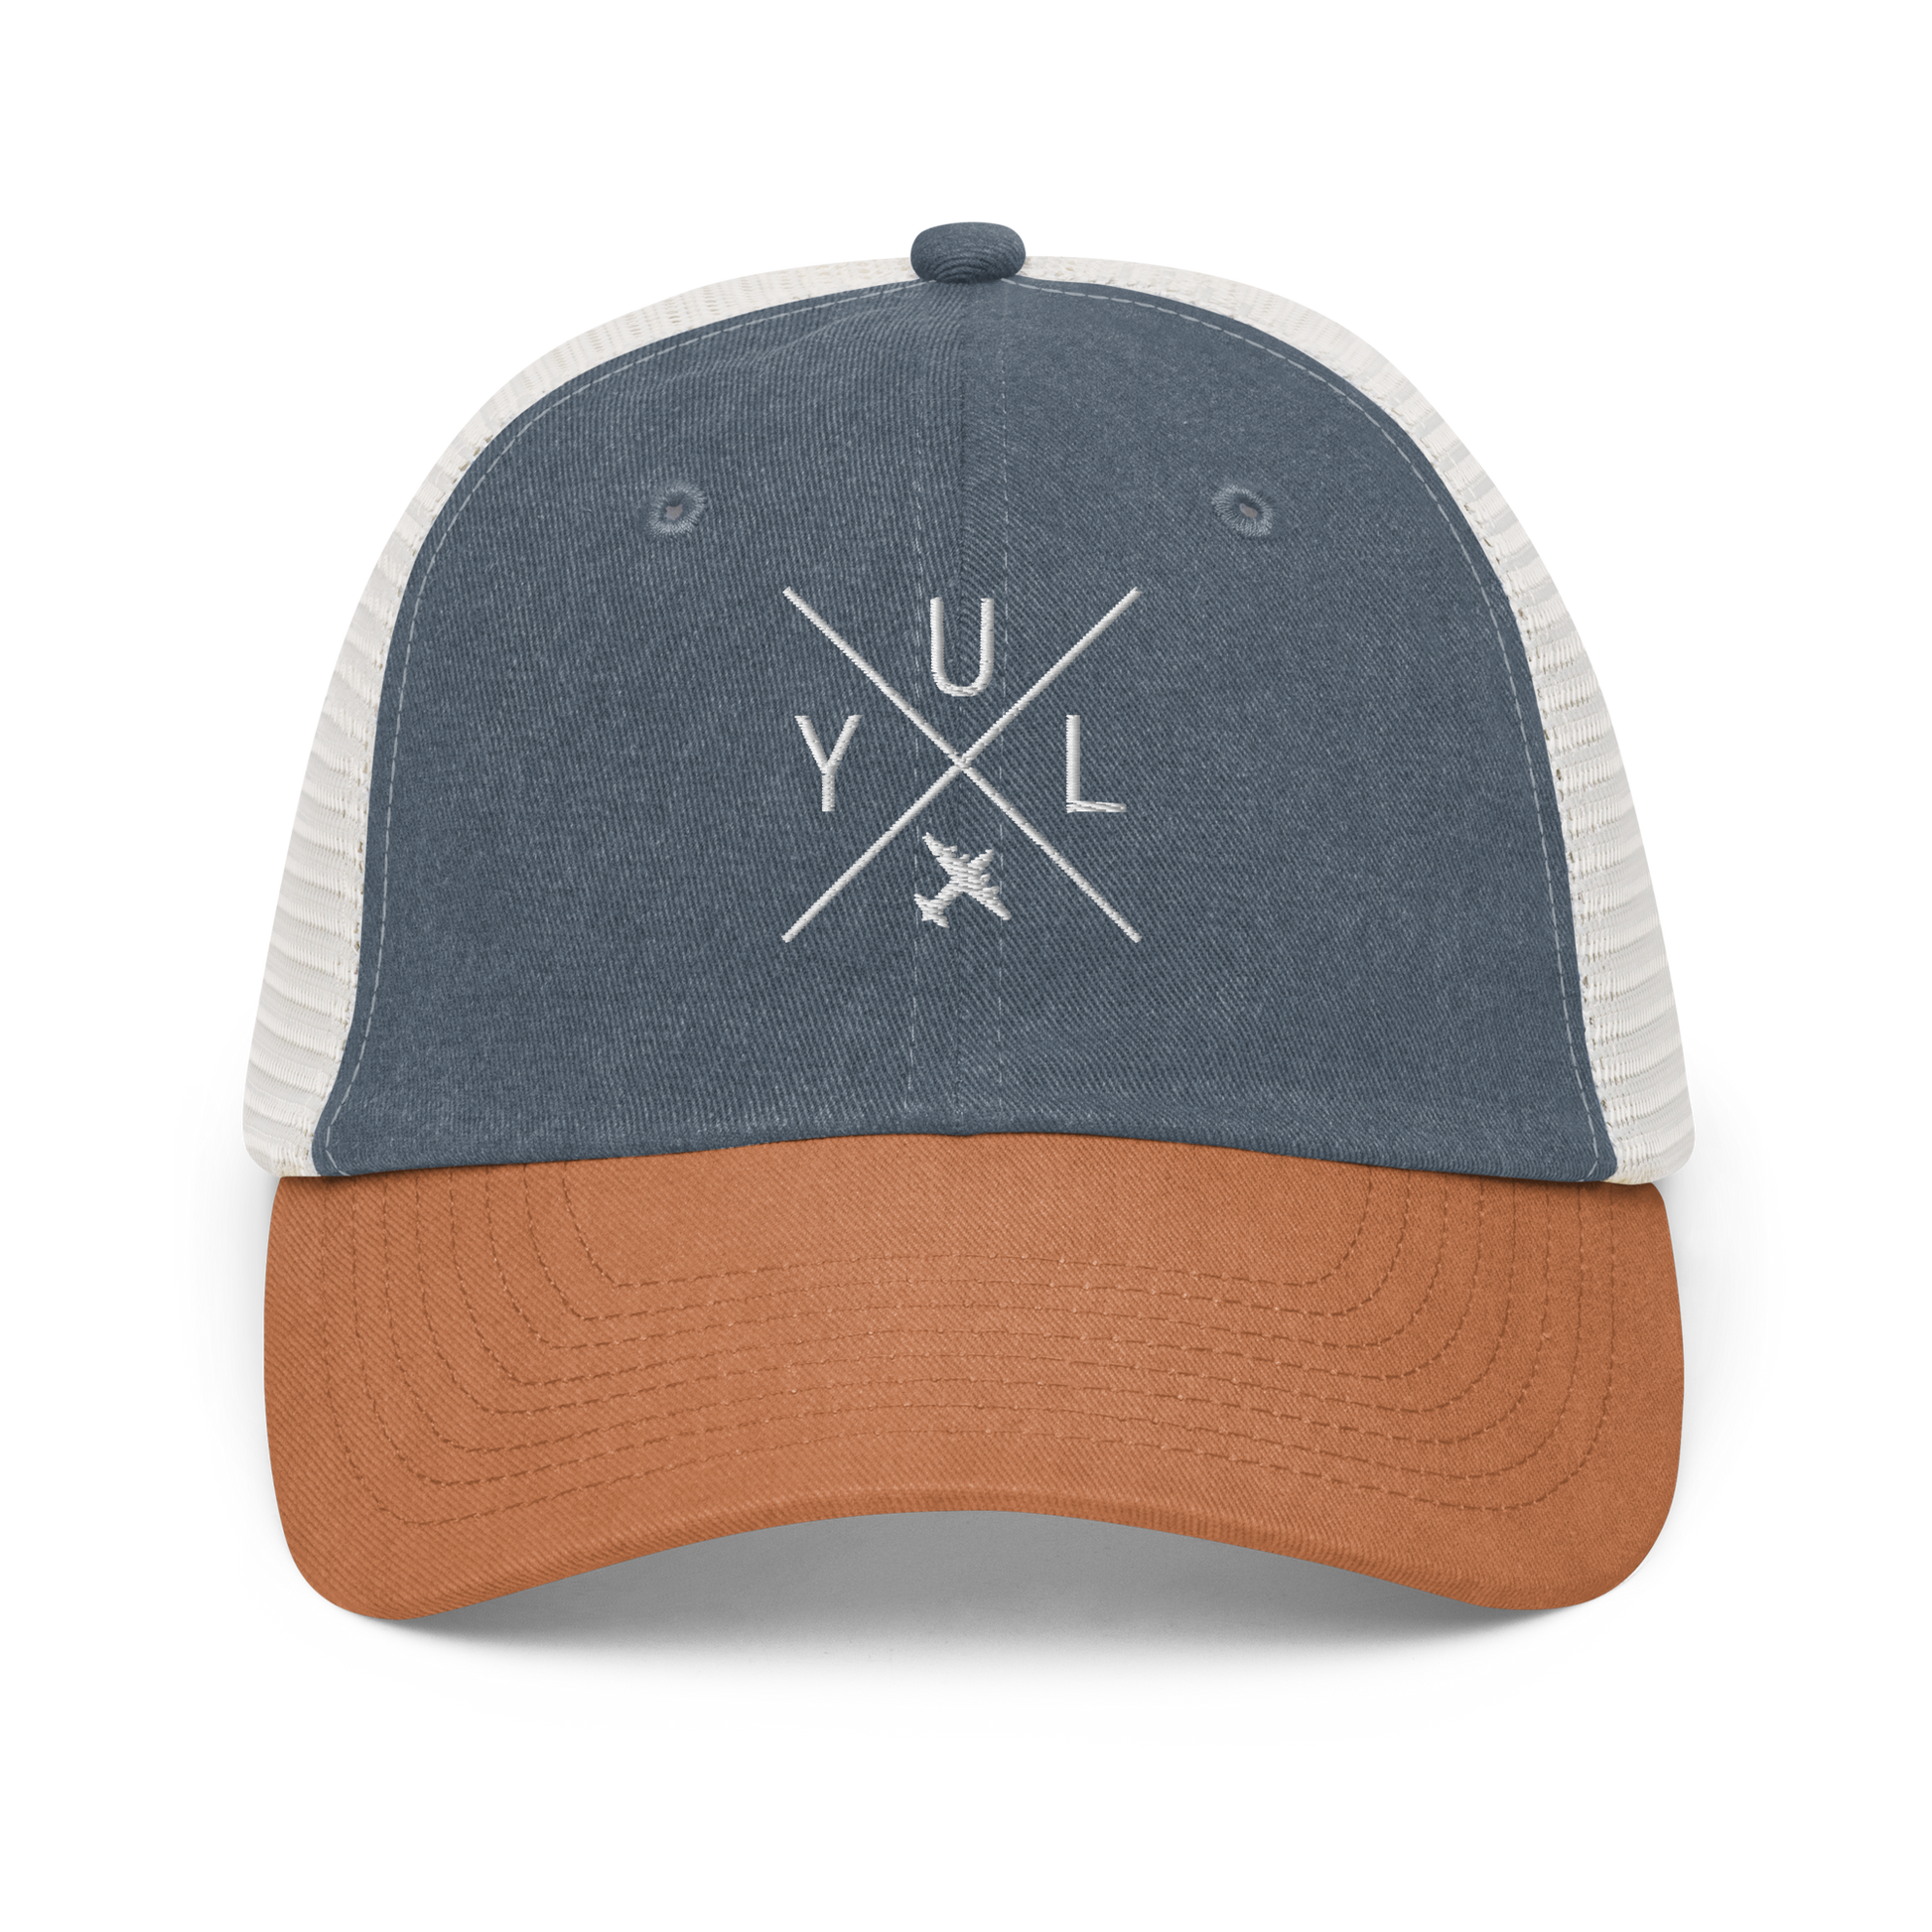 YHM Designs - YUL Montreal Pigment-Dyed Trucker Cap - Crossed-X Design with Airport Code and Vintage Propliner - White Embroidery - Image 15